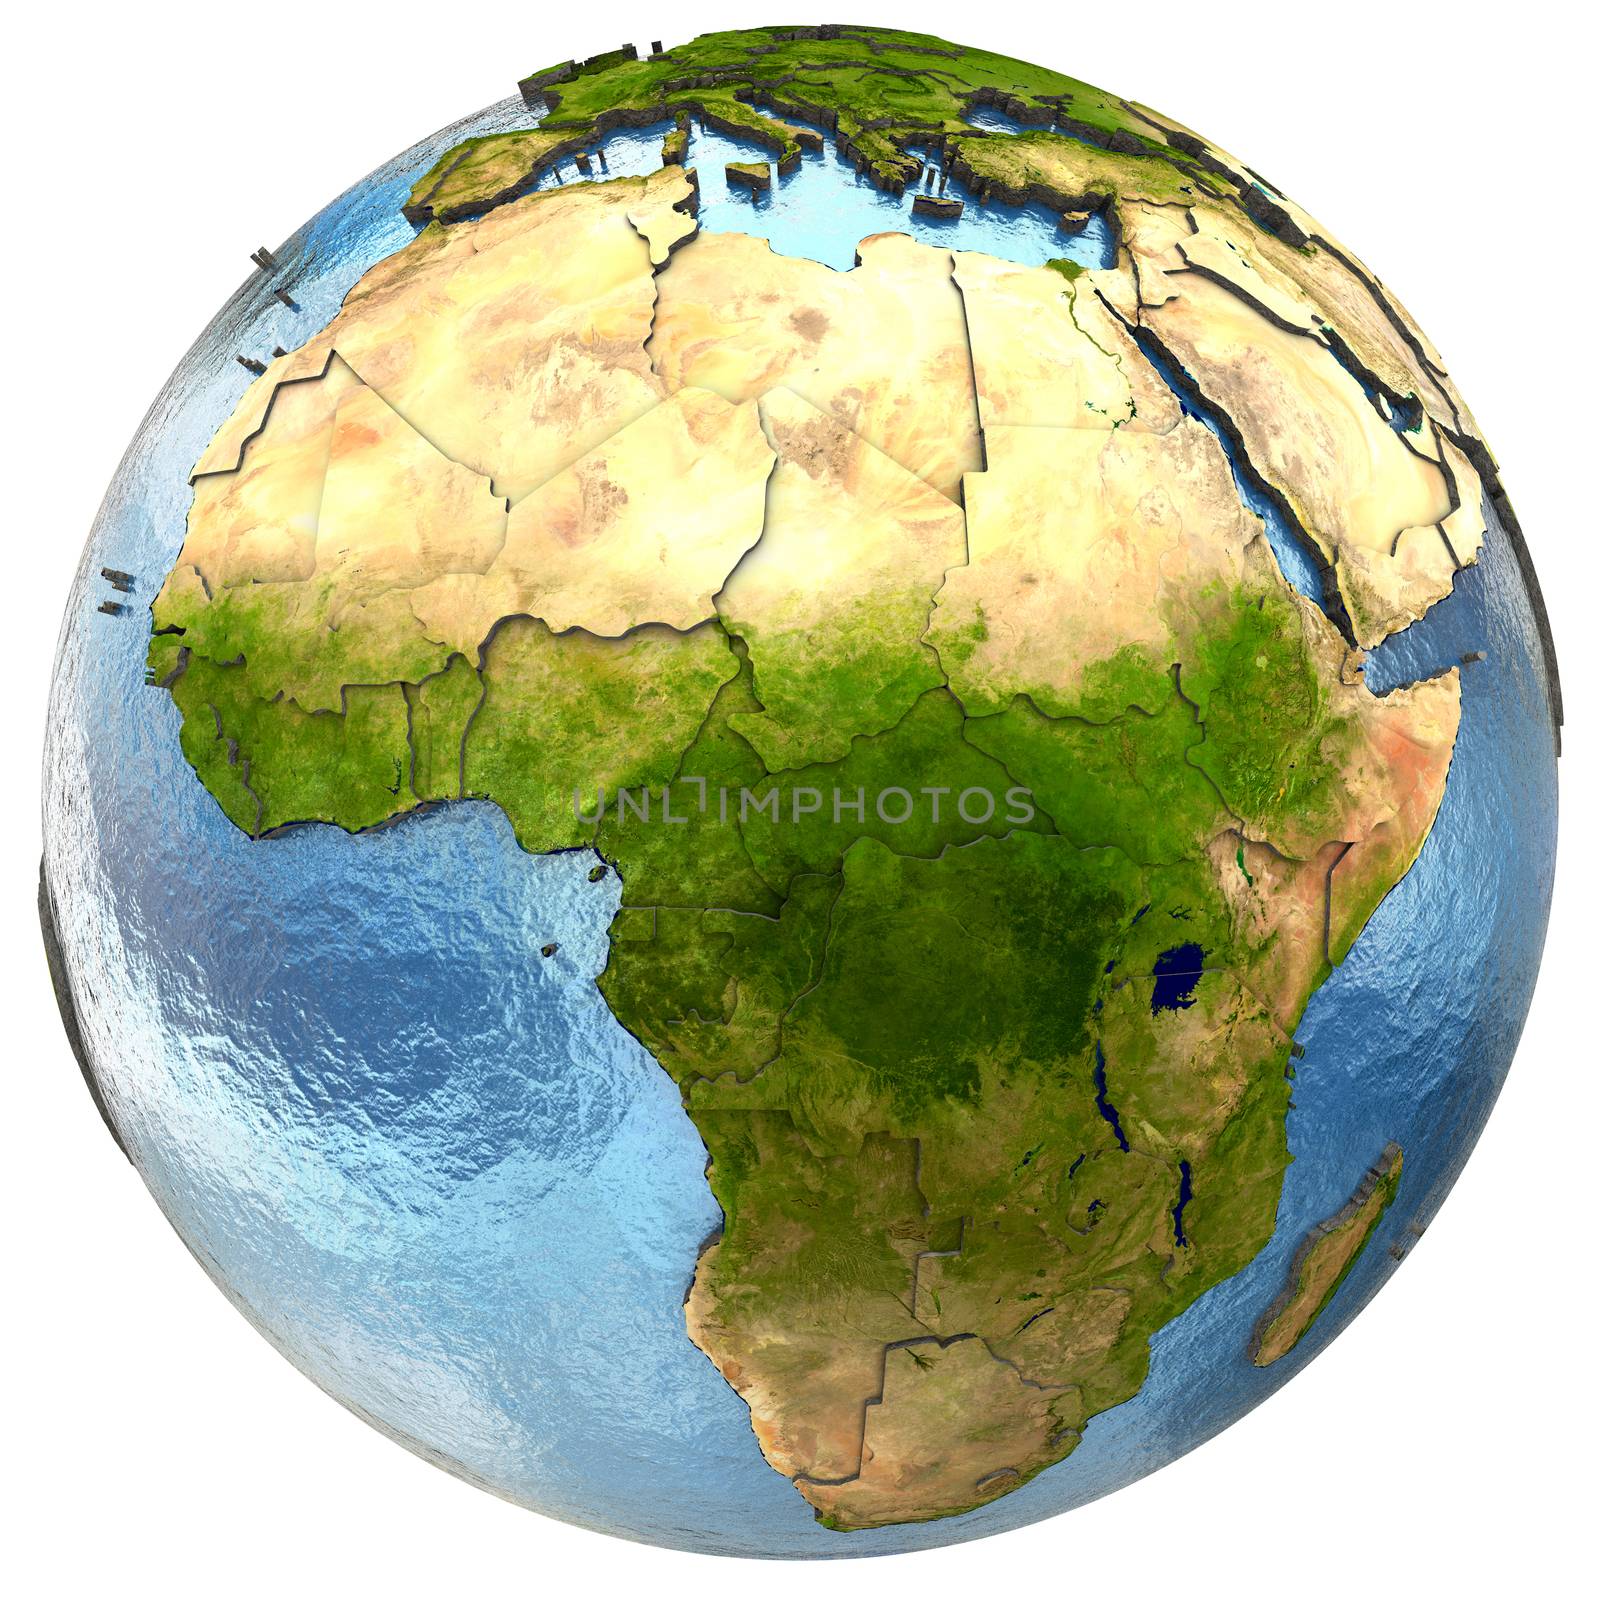 Africa on highly detailed planet Earth with embossed continents and country borders. Isolated on white background. Elements of this image furnished by NASA.